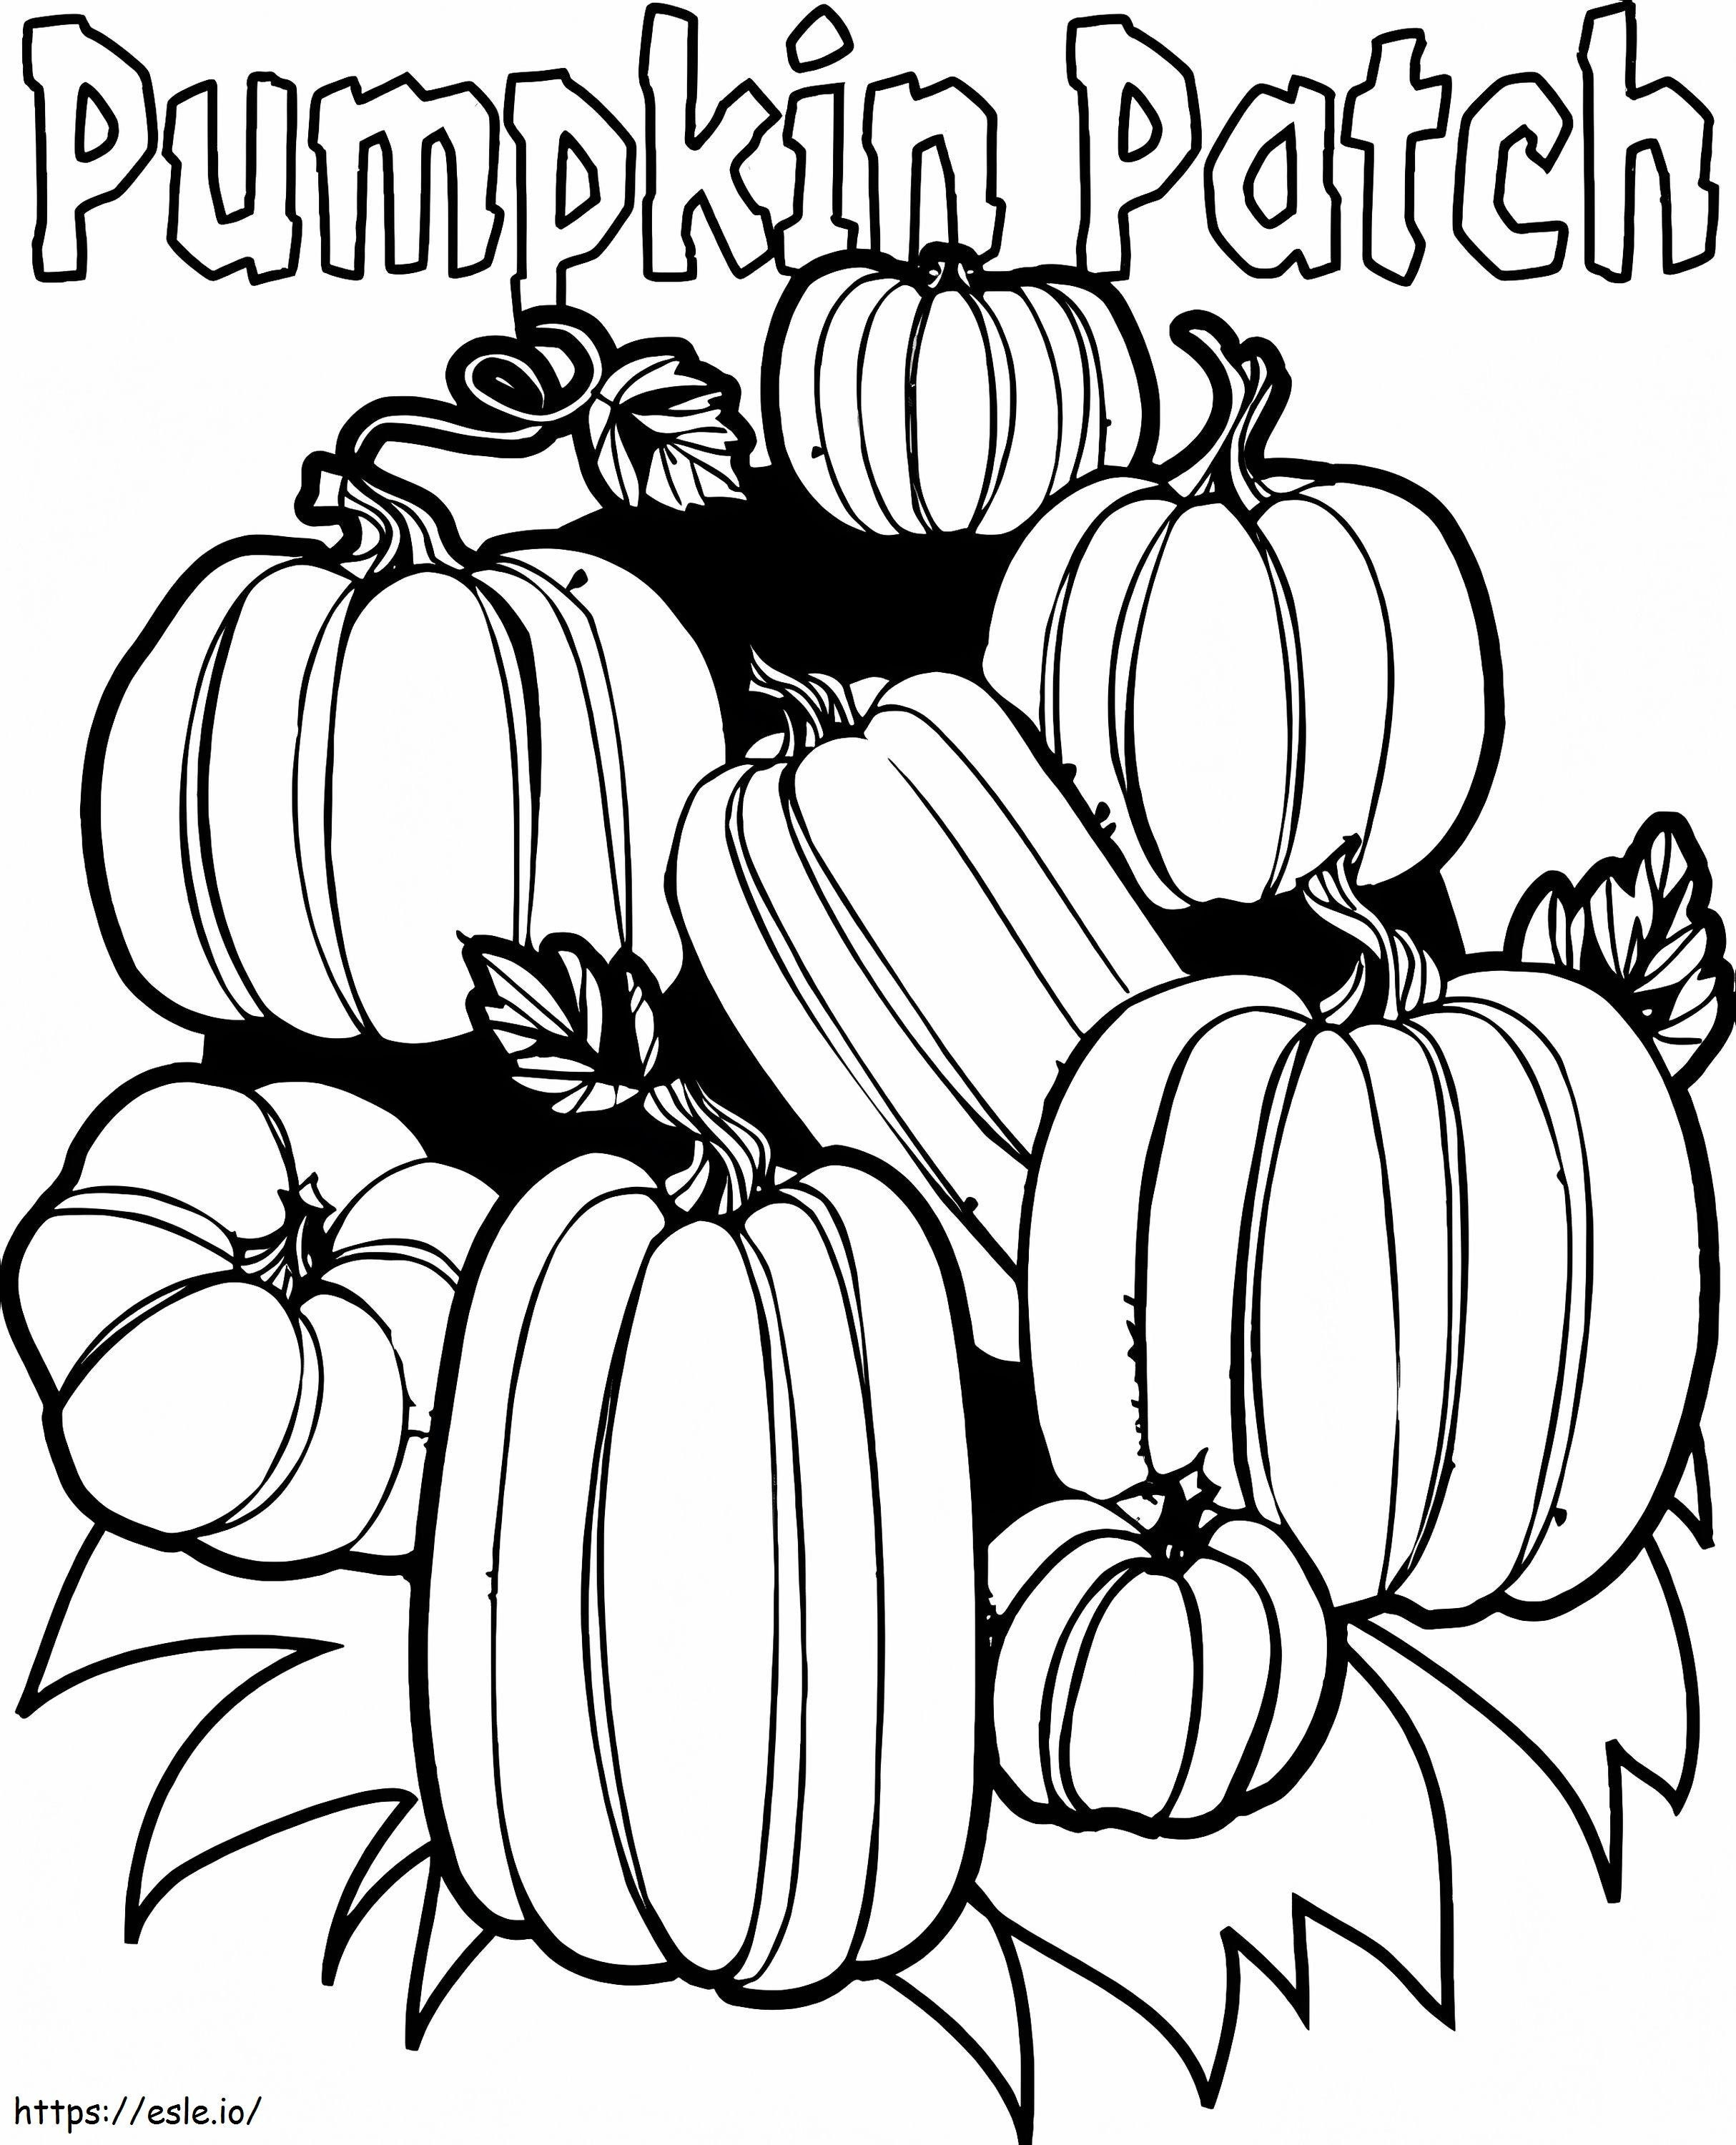 Free Printable Pumpkin Patch coloring page